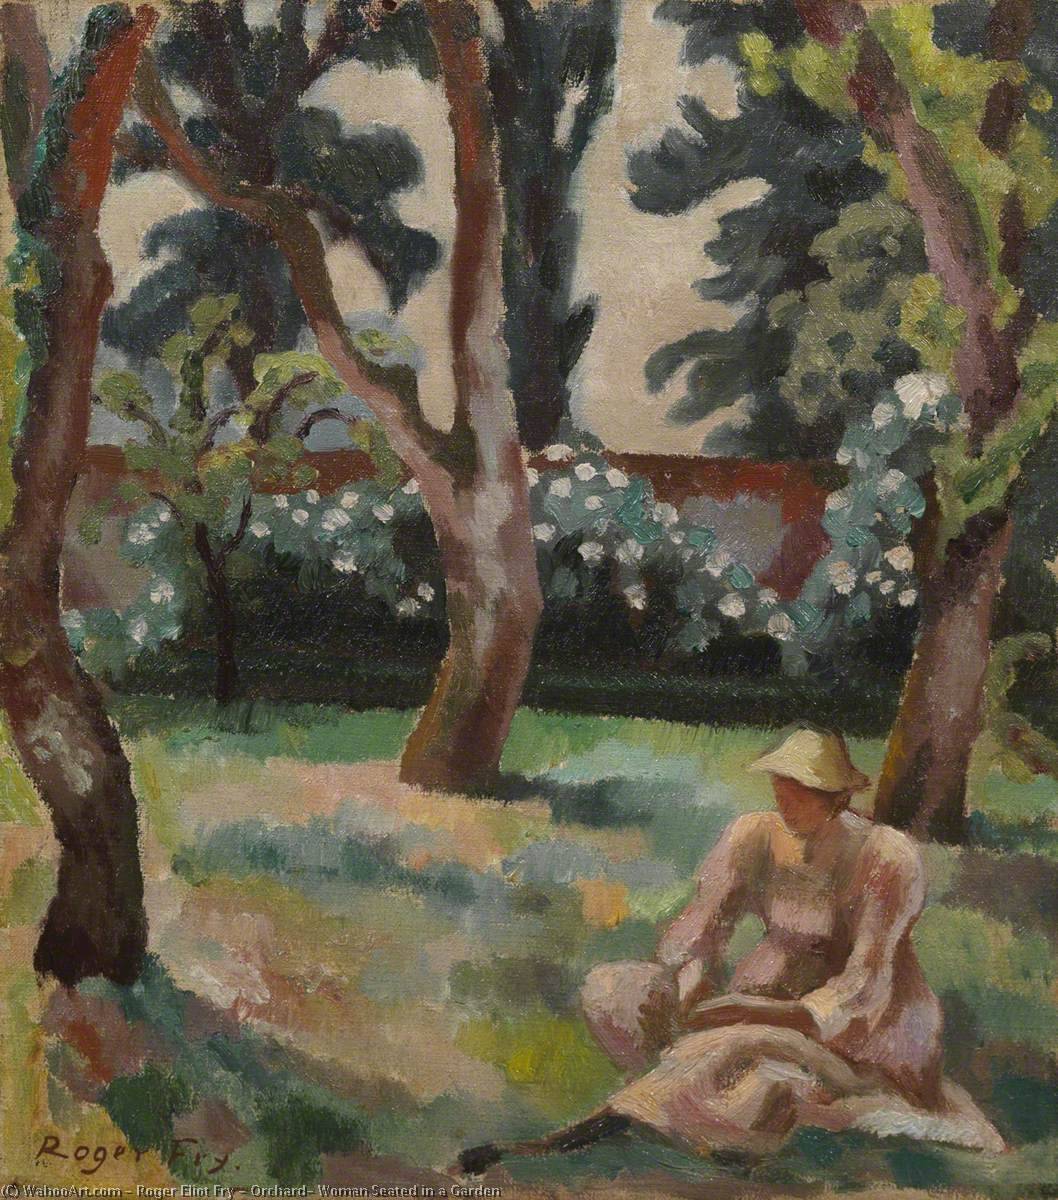 WikiOO.org - Encyclopedia of Fine Arts - Lukisan, Artwork Roger Eliot Fry - Orchard, Woman Seated in a Garden